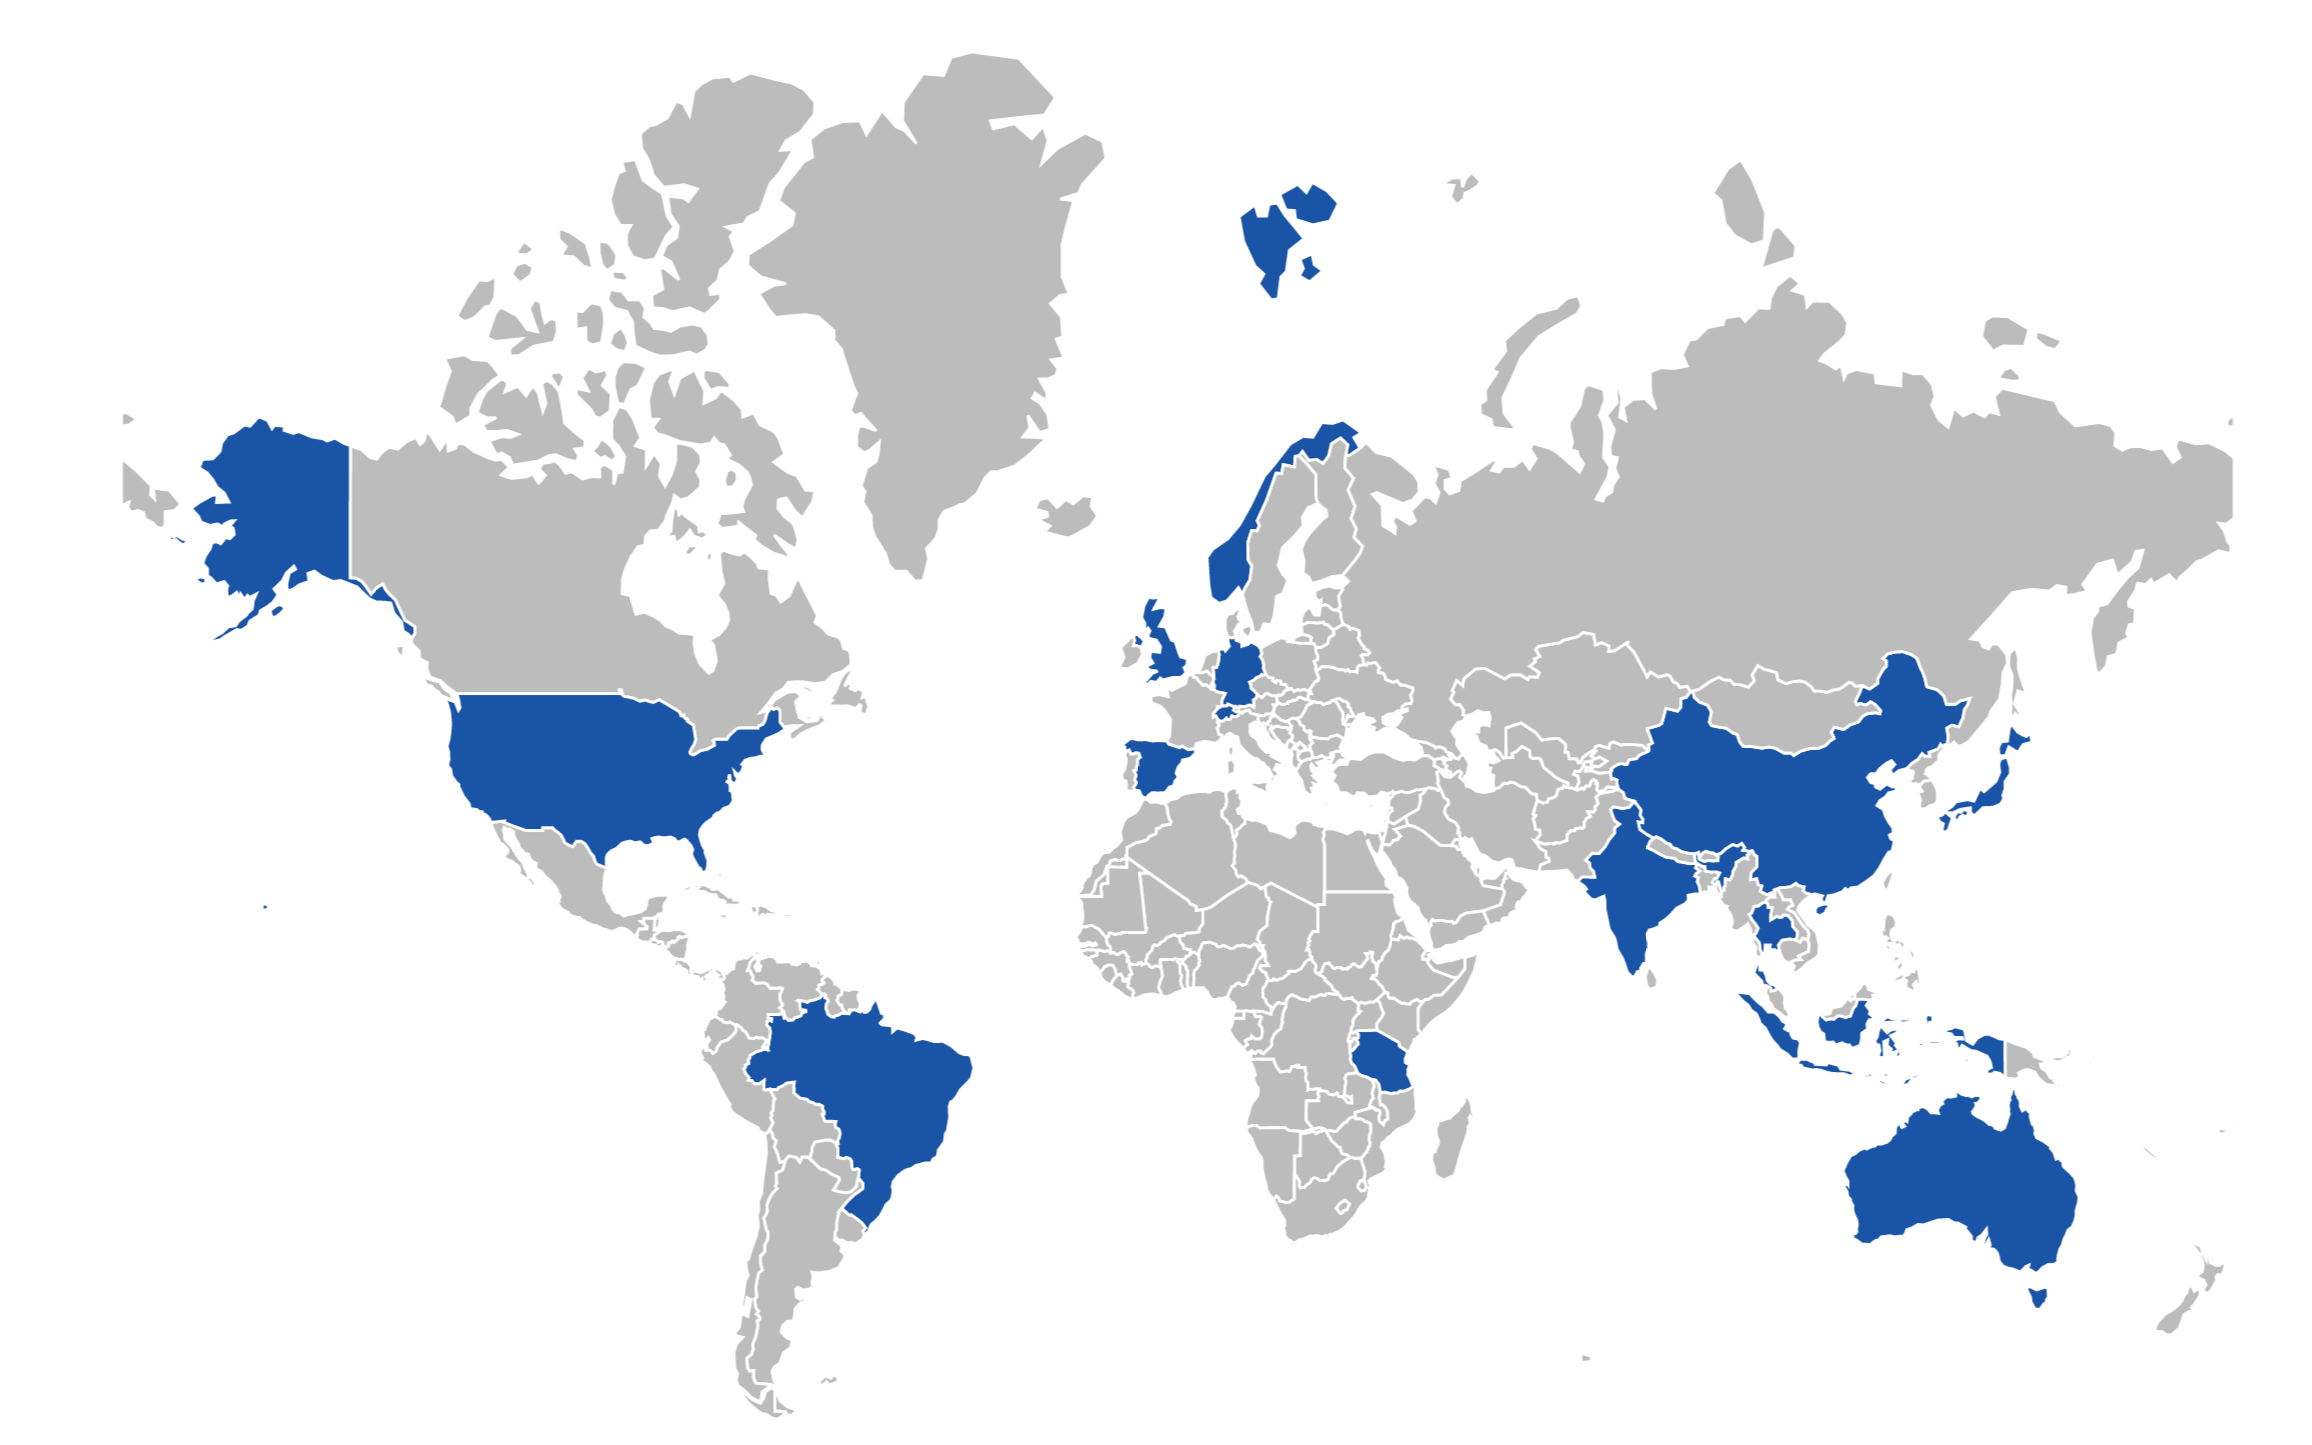 World map where the colored countries mark the locations of Alumni Chapters